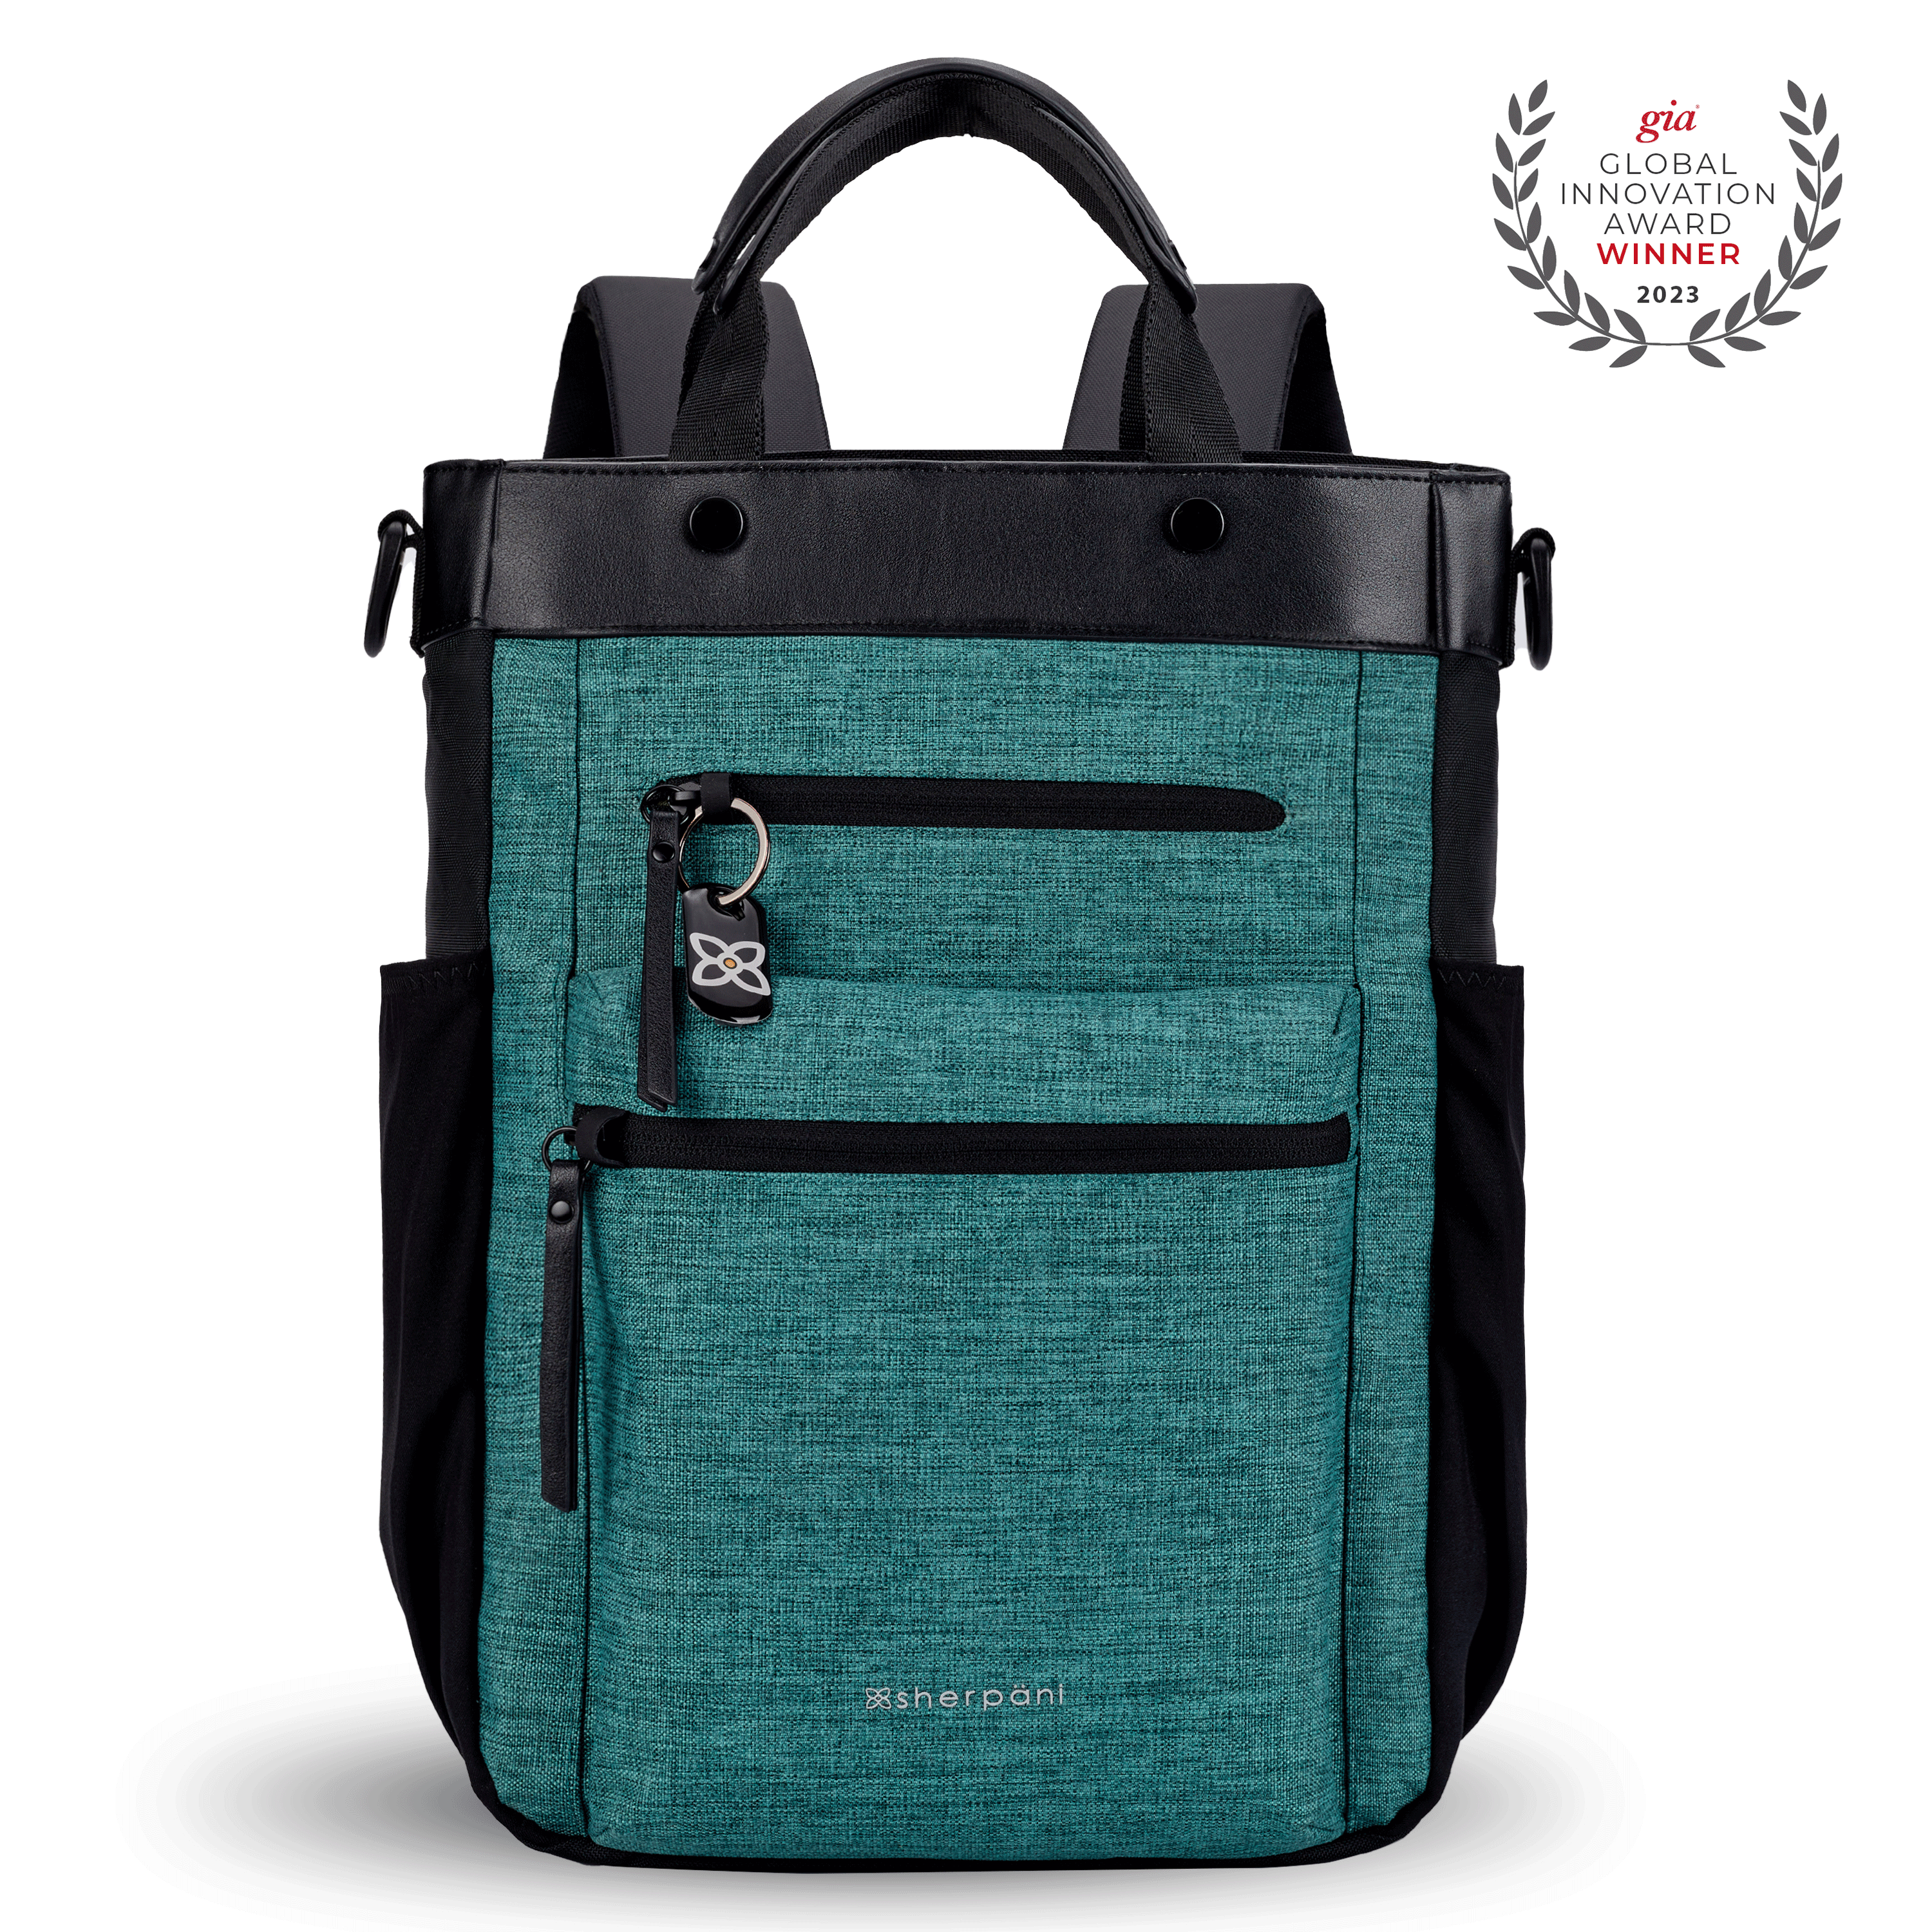 Flat front view of Sherpani's Anti-Theft bag, the Soleil AT in Teal, with vegan leather accents in black. On the front are two locking zipper compartments, a ReturnMe tag is clipped to the upper one. Two elastic water bottle holders sit on either side of the bag. It has padded backpack straps, short tote handles, and a place to attach a crossbody strap. 